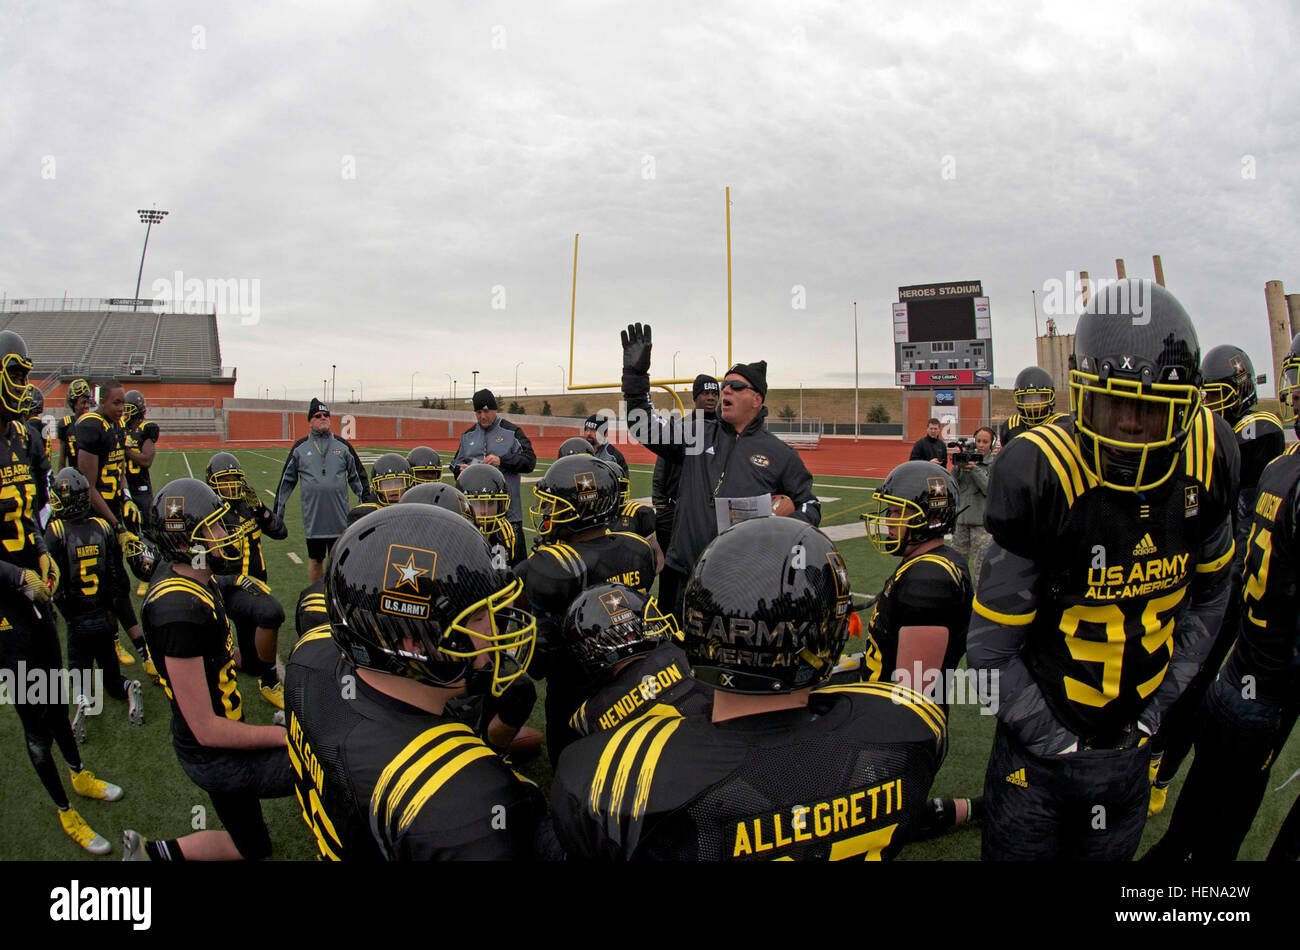 Head Coach of the 2014 U.S. Army All-American Bowl East Team, Bob Sphire, from North Gwinnett High School, Suwanee, Ga., speaks to his entire team at a short break during East Team's first practice at Heroes Stadium in San Antonio, Dec. 30, 2013. The U.S. Army All-American Bowl is the premier high school football event in the country, featuring more than 90 of America's best senior high school football players competing in an East vs. West game, occurring this year, Jan. 4, 2014. In 2013, the bowl drew a crowd of 40,133, the largest to date. (U.S. Army Reserve Photo by Pfc. Thomas C. Love, 205 Stock Photo